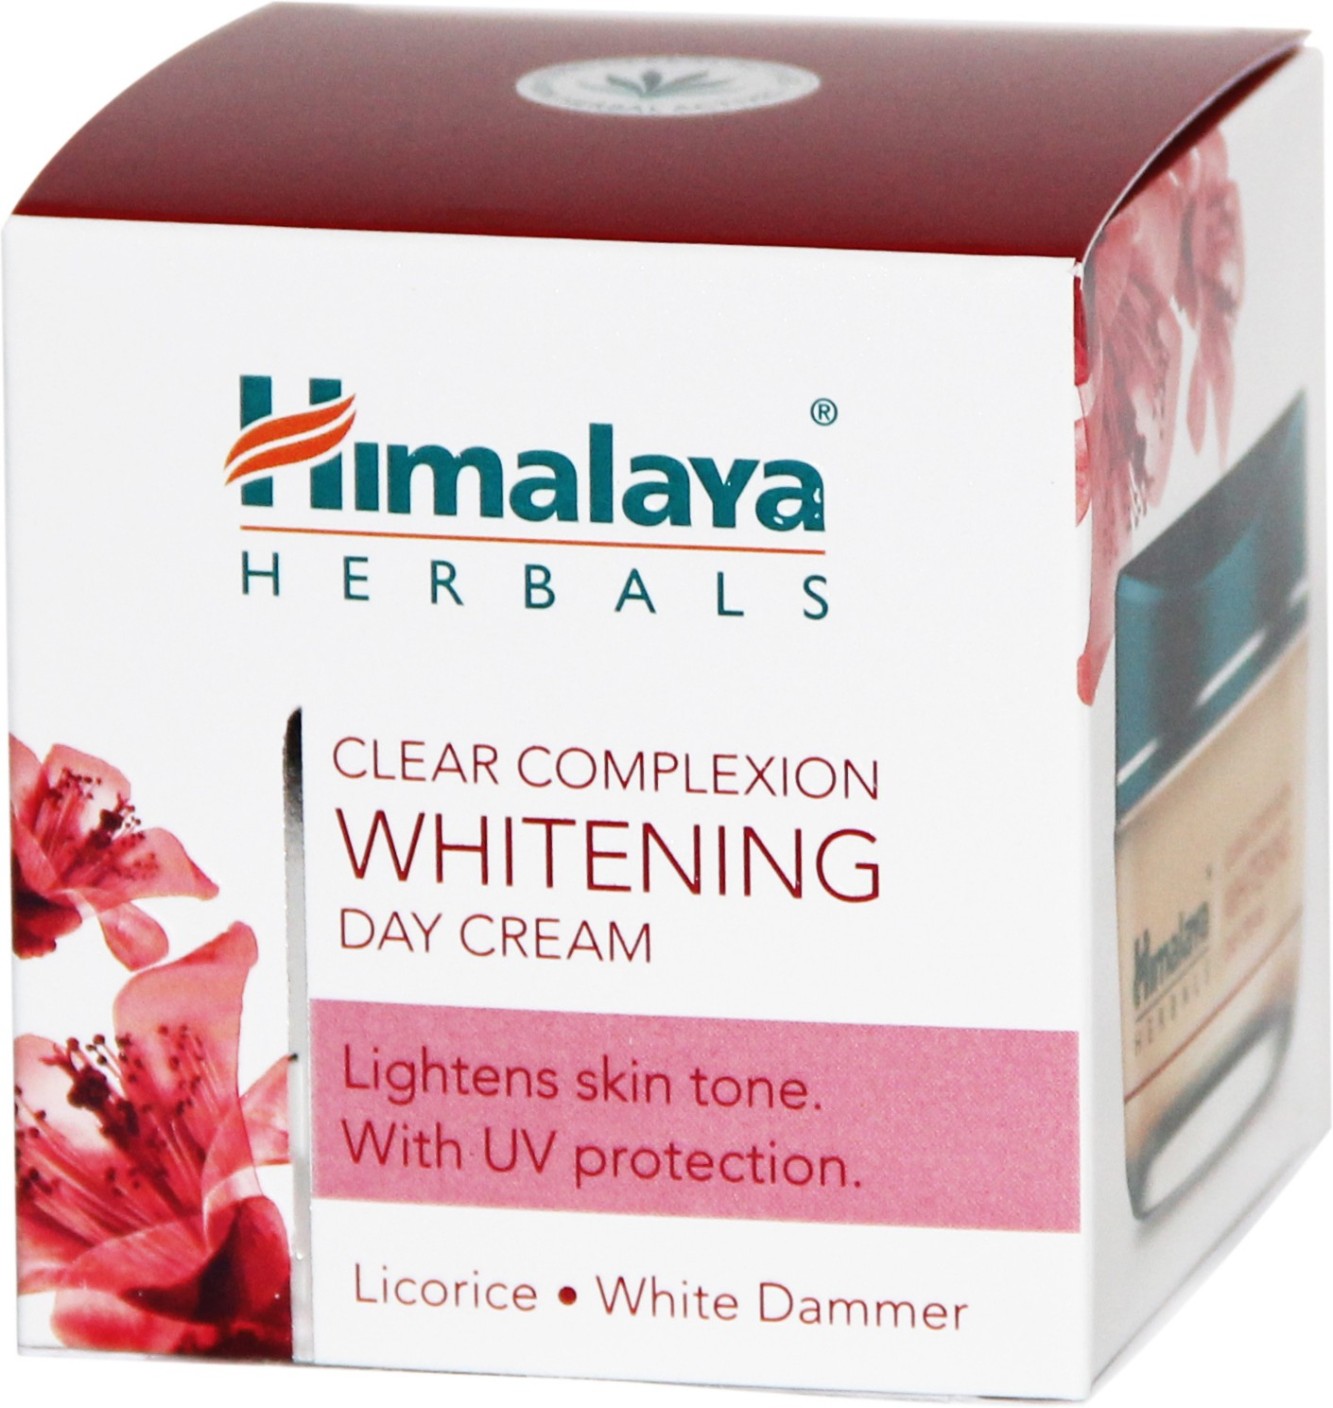 Himalaya Clear Complexion Whitening Day Cream - Price in 